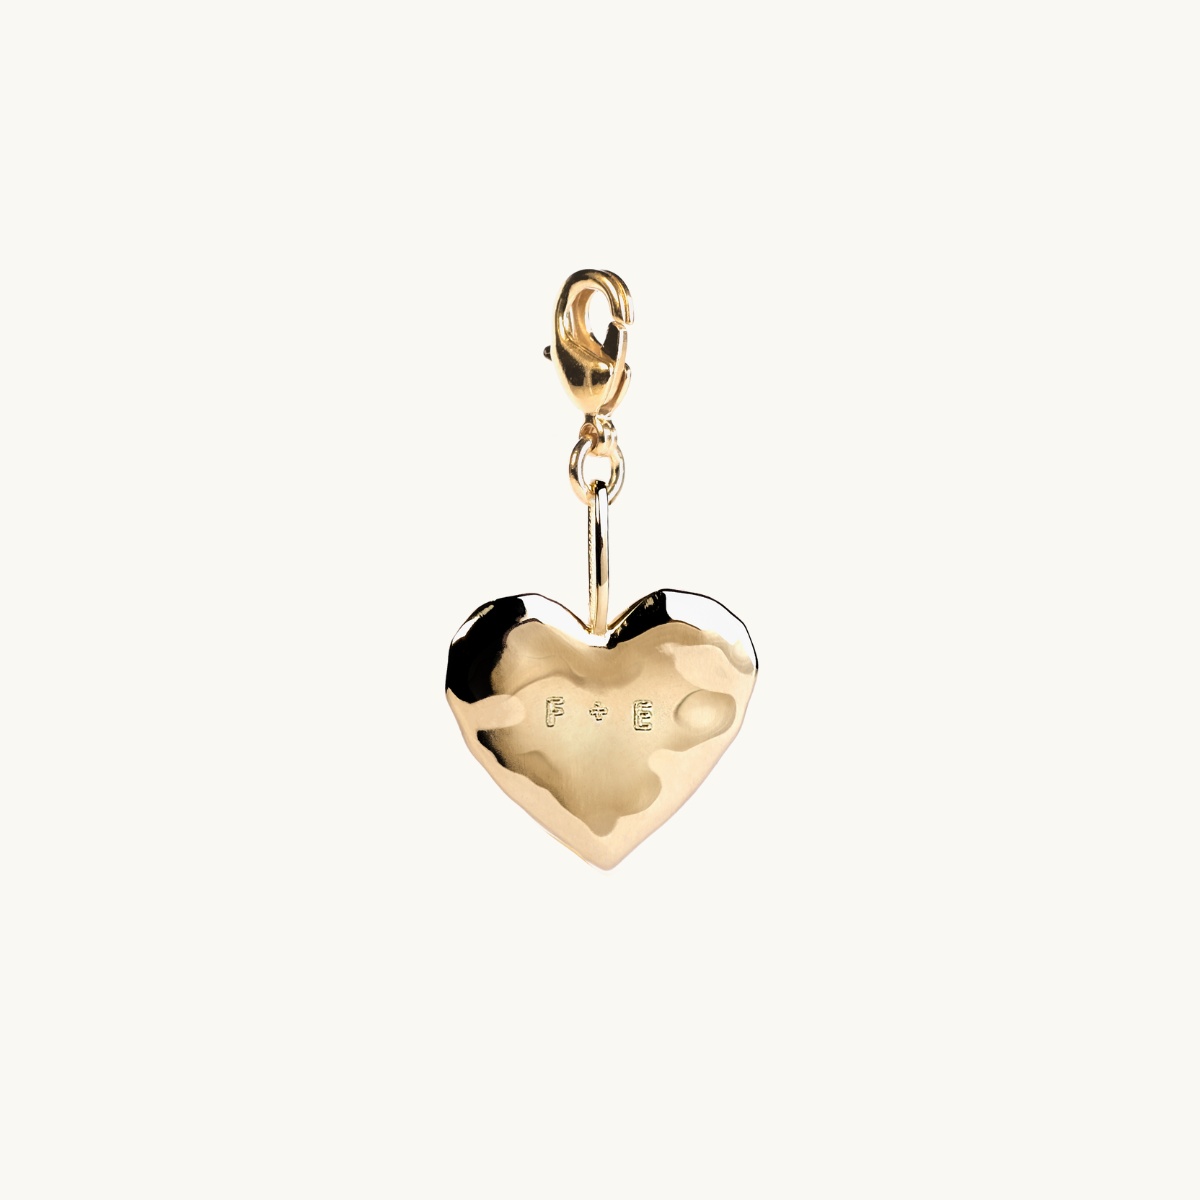 Pendant in gold in the shape of a heart with name engraving